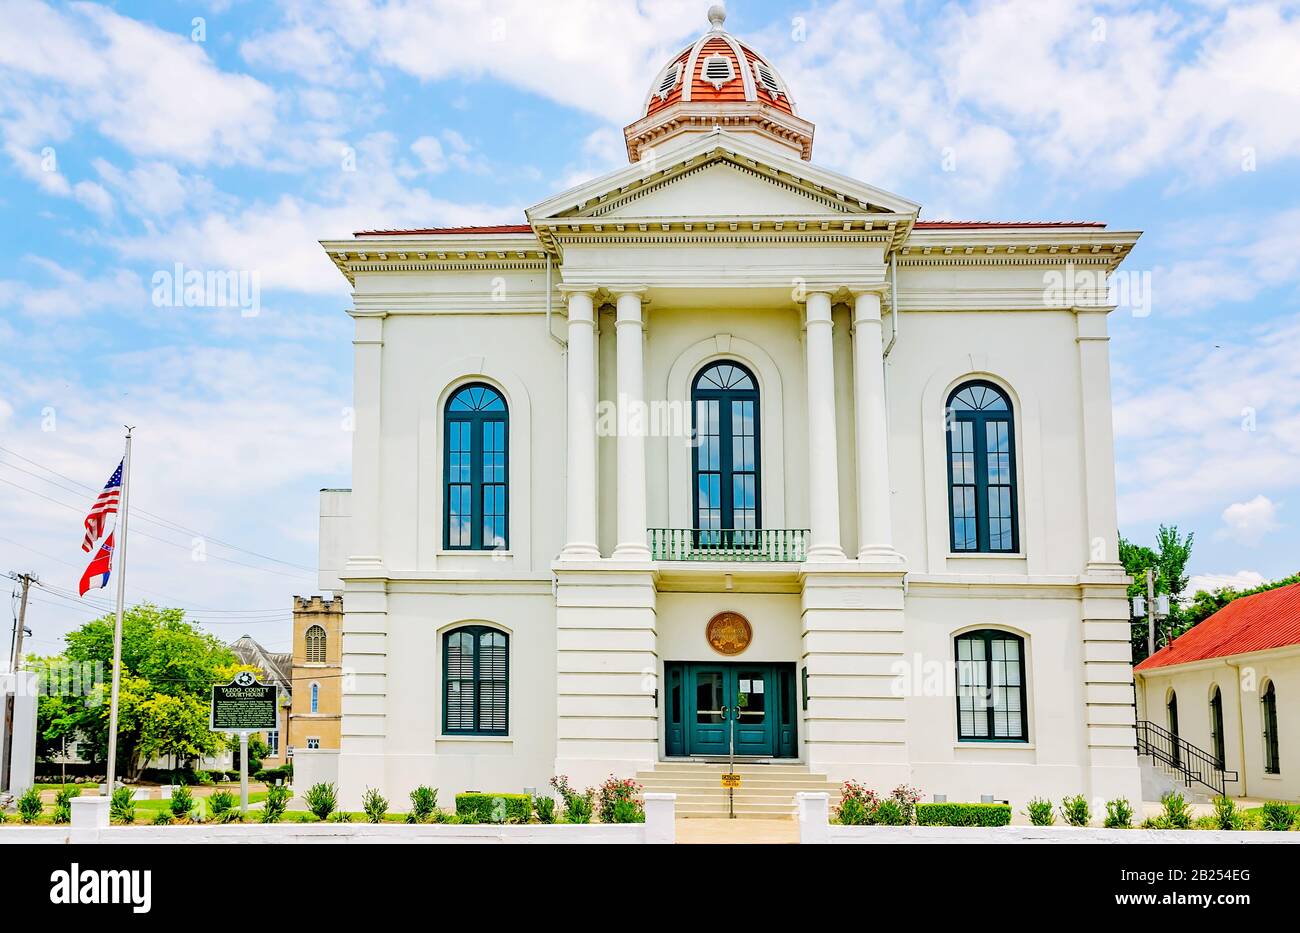 The Yazoo County Courthouse is pictured in Yazoo City, Mississippi. The Yazoo County Courthouse, built in 1872, is an Italianate stuccoed brick. Stock Photo